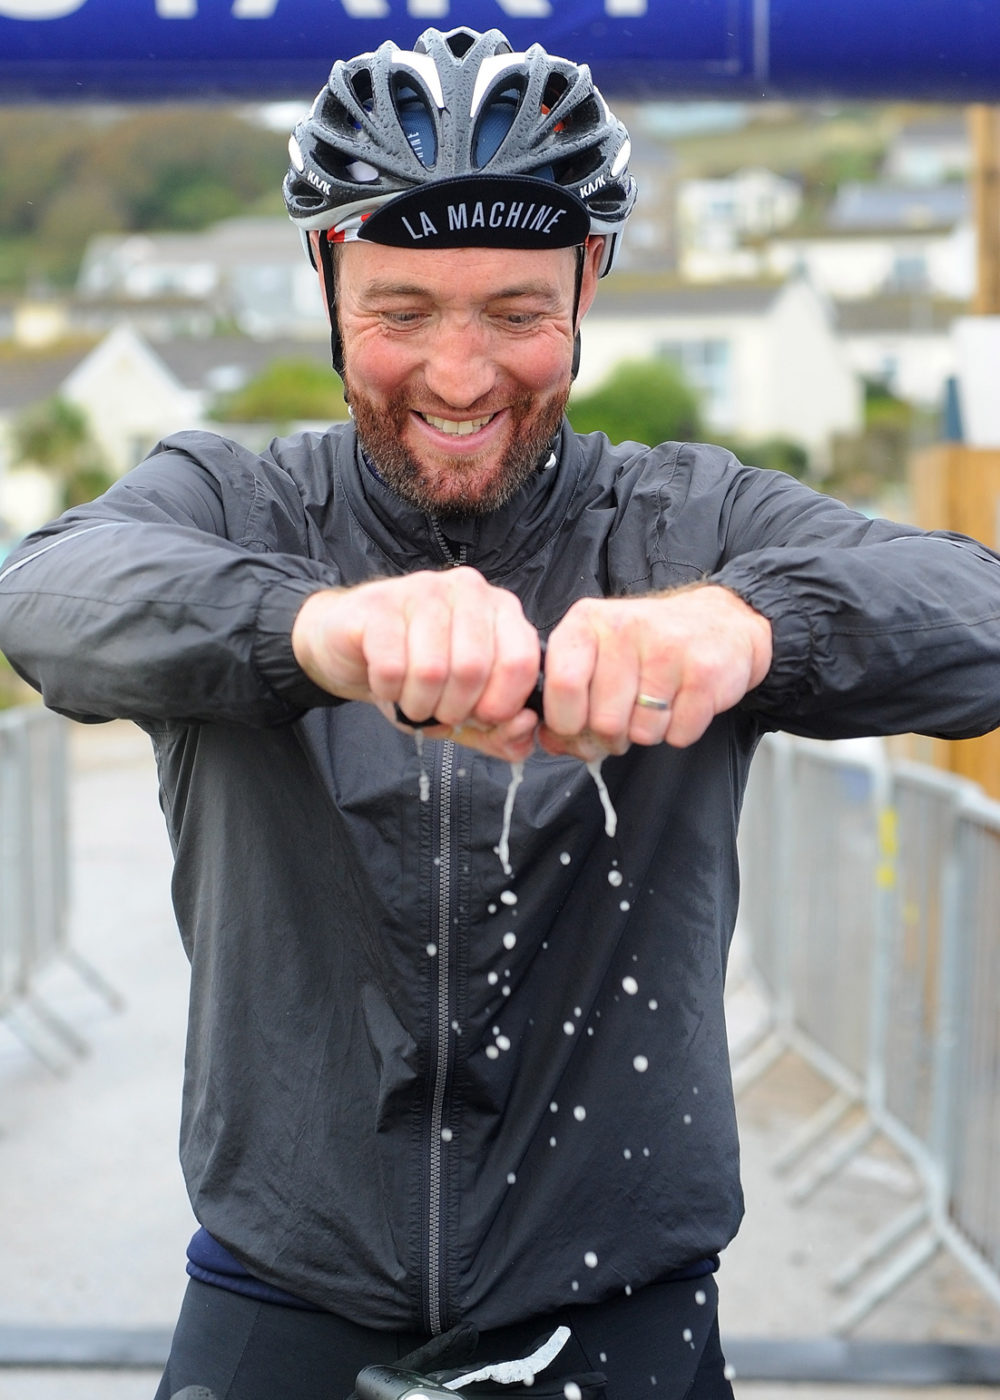 cyclist wringing hat lands end 100 sportiva events the modest photographer ali macphee